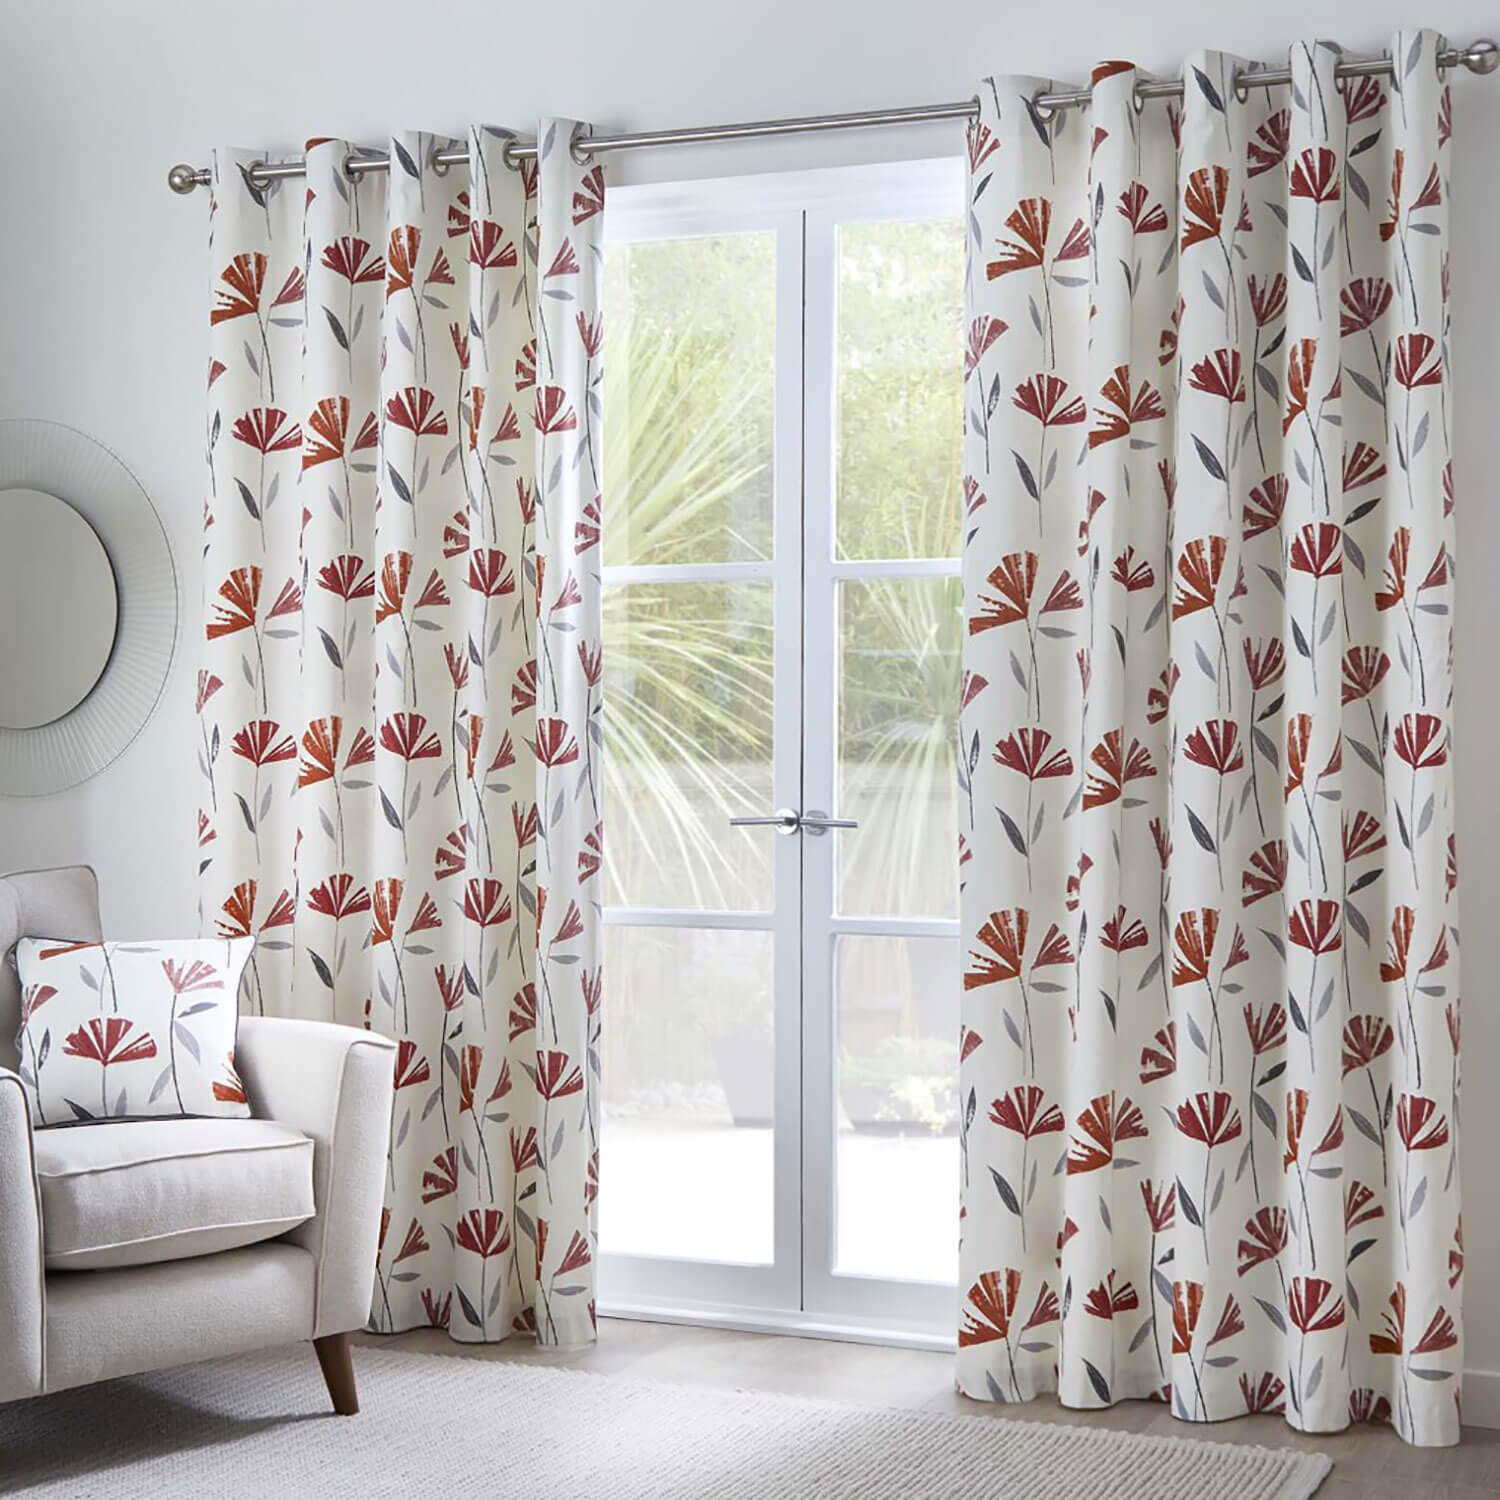 The Home Bedroom Dacey Eyelet Curtains - Red 1 Shaws Department Stores